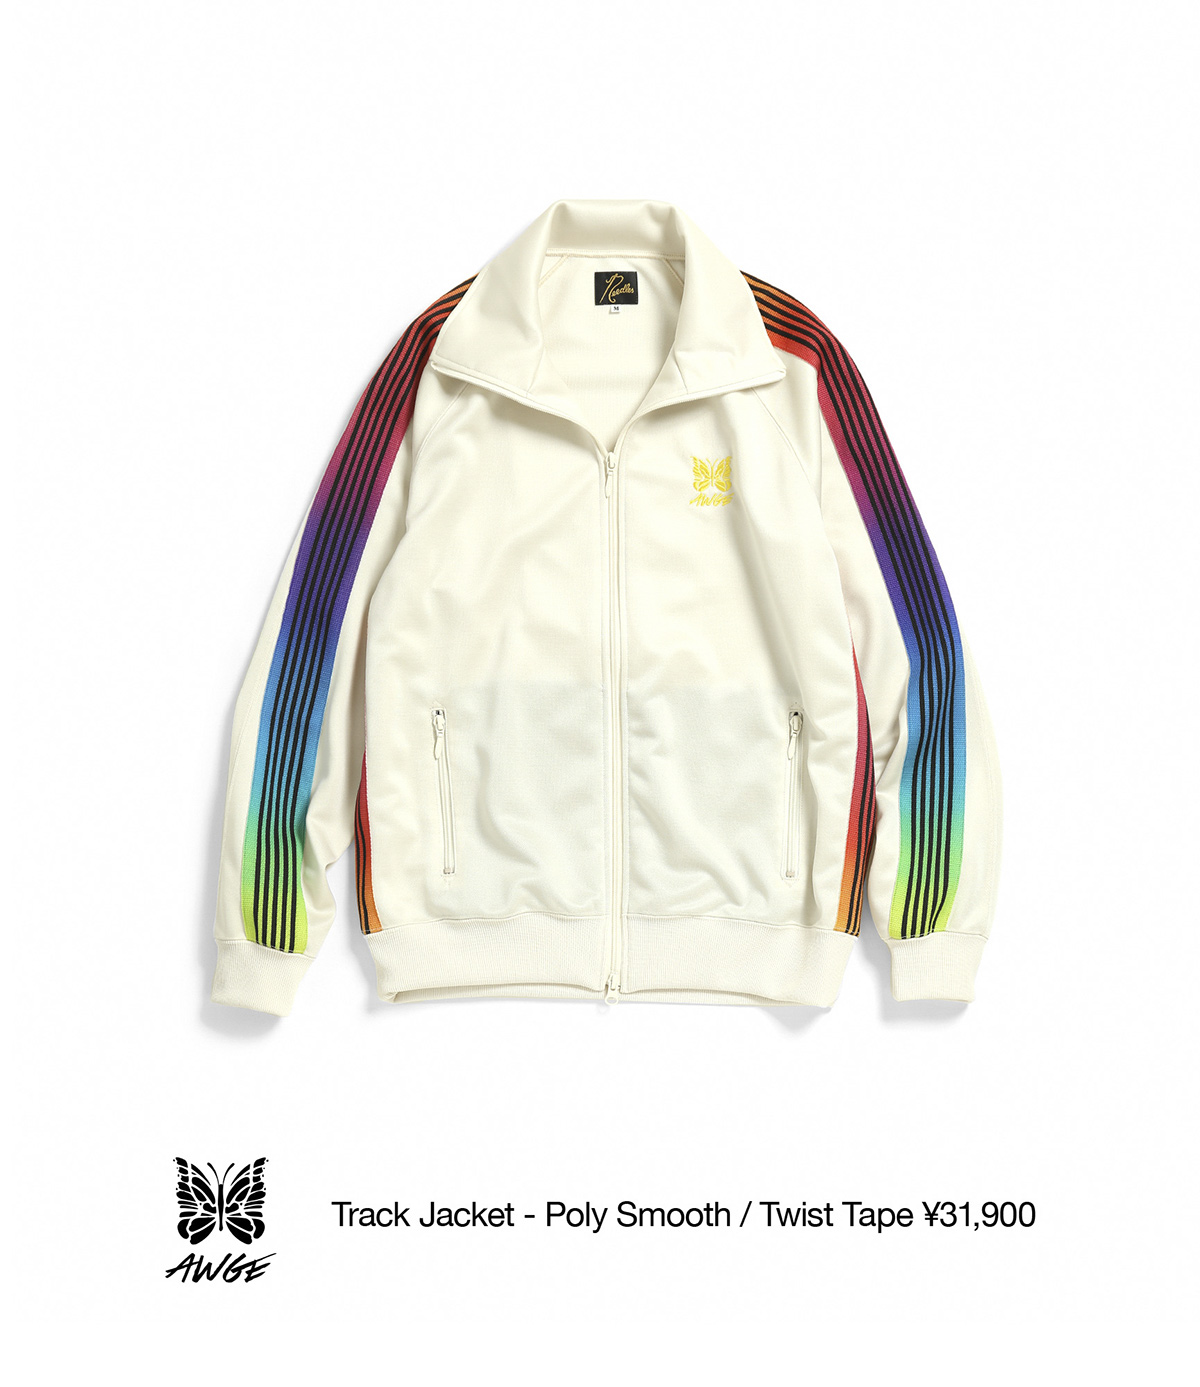 Track Jacket - Poly Smooth / Twist Tape ¥31,900